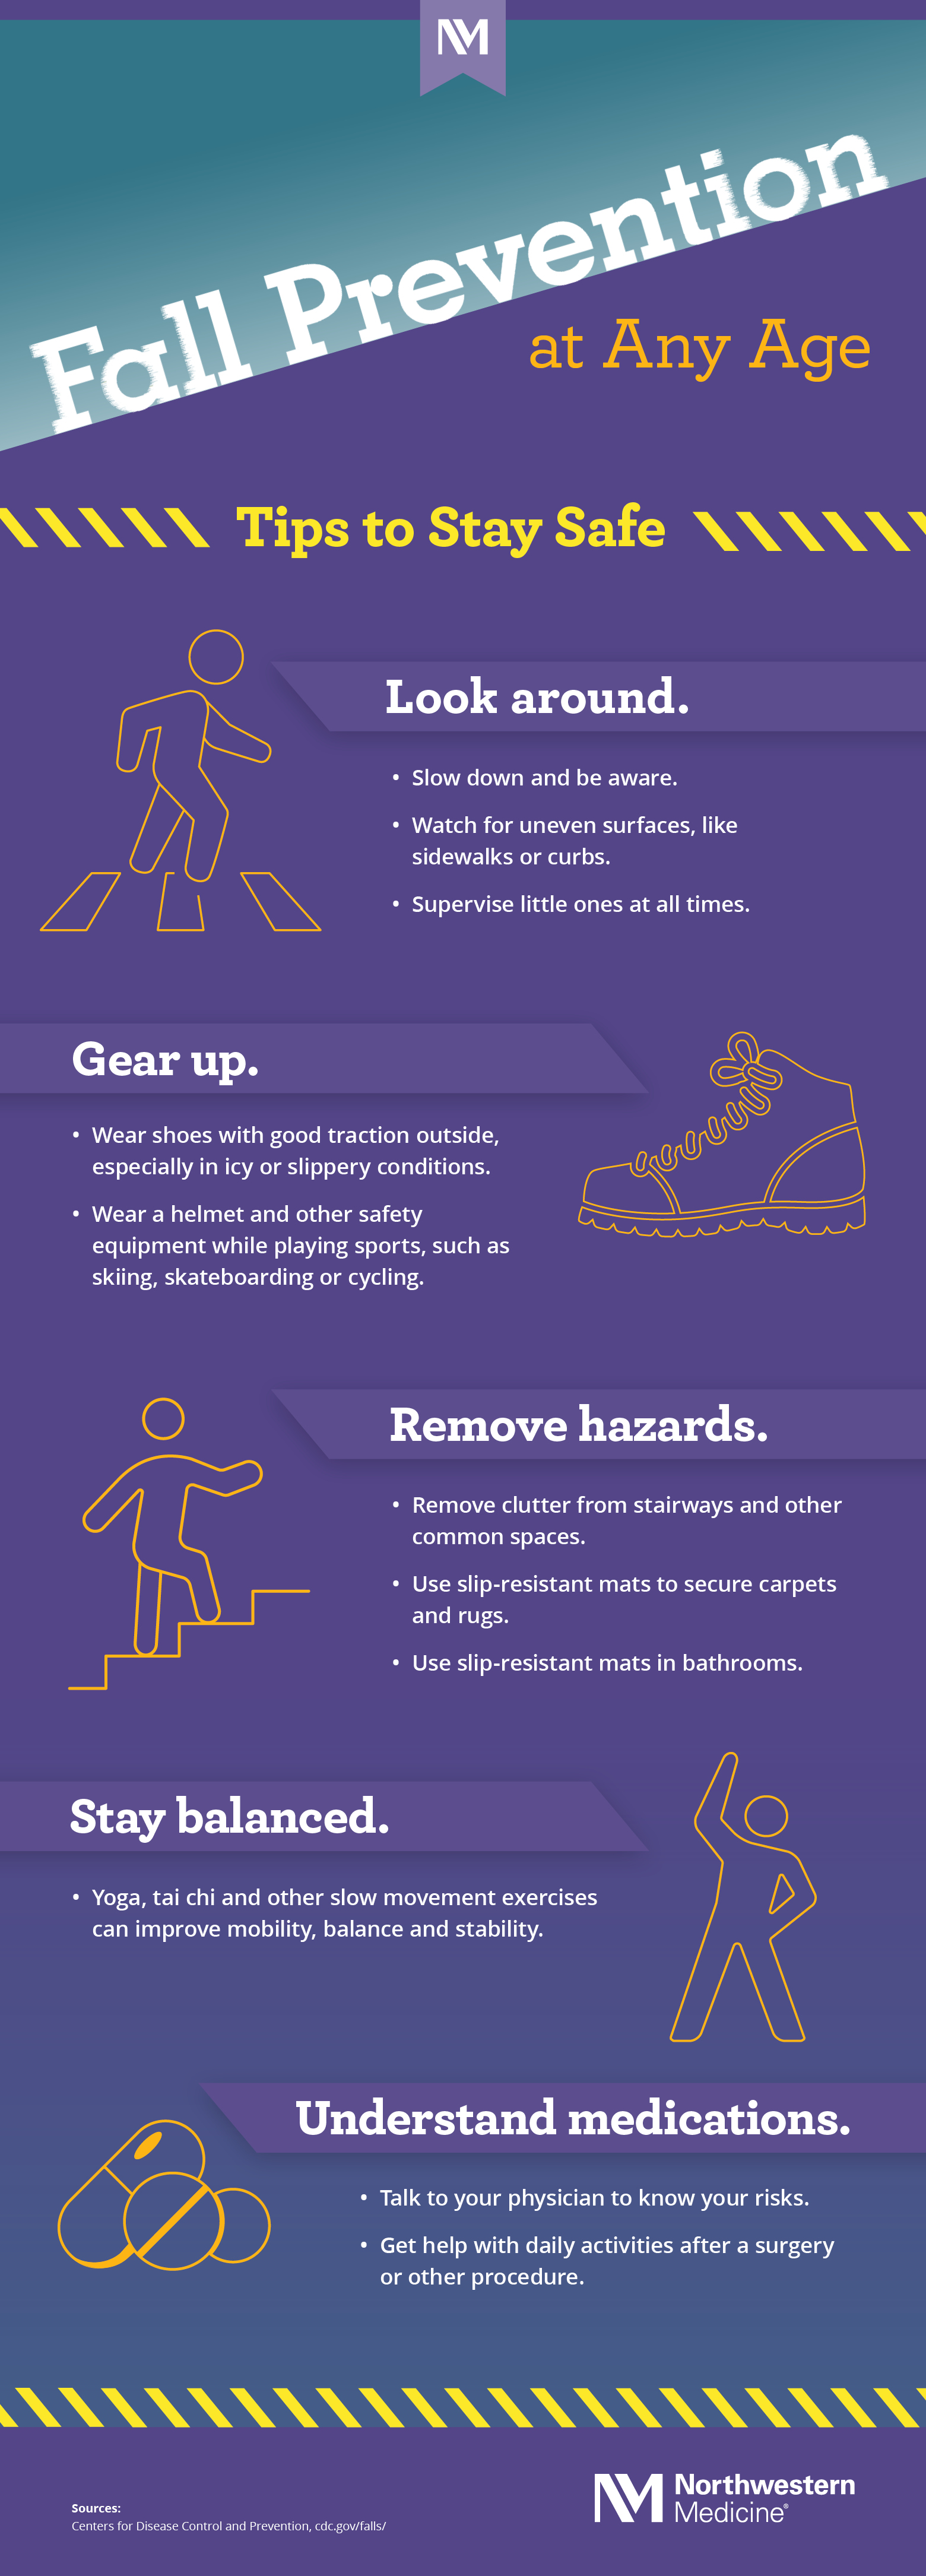 Preventing Falls At All Ages Infographic Northwestern Medicine